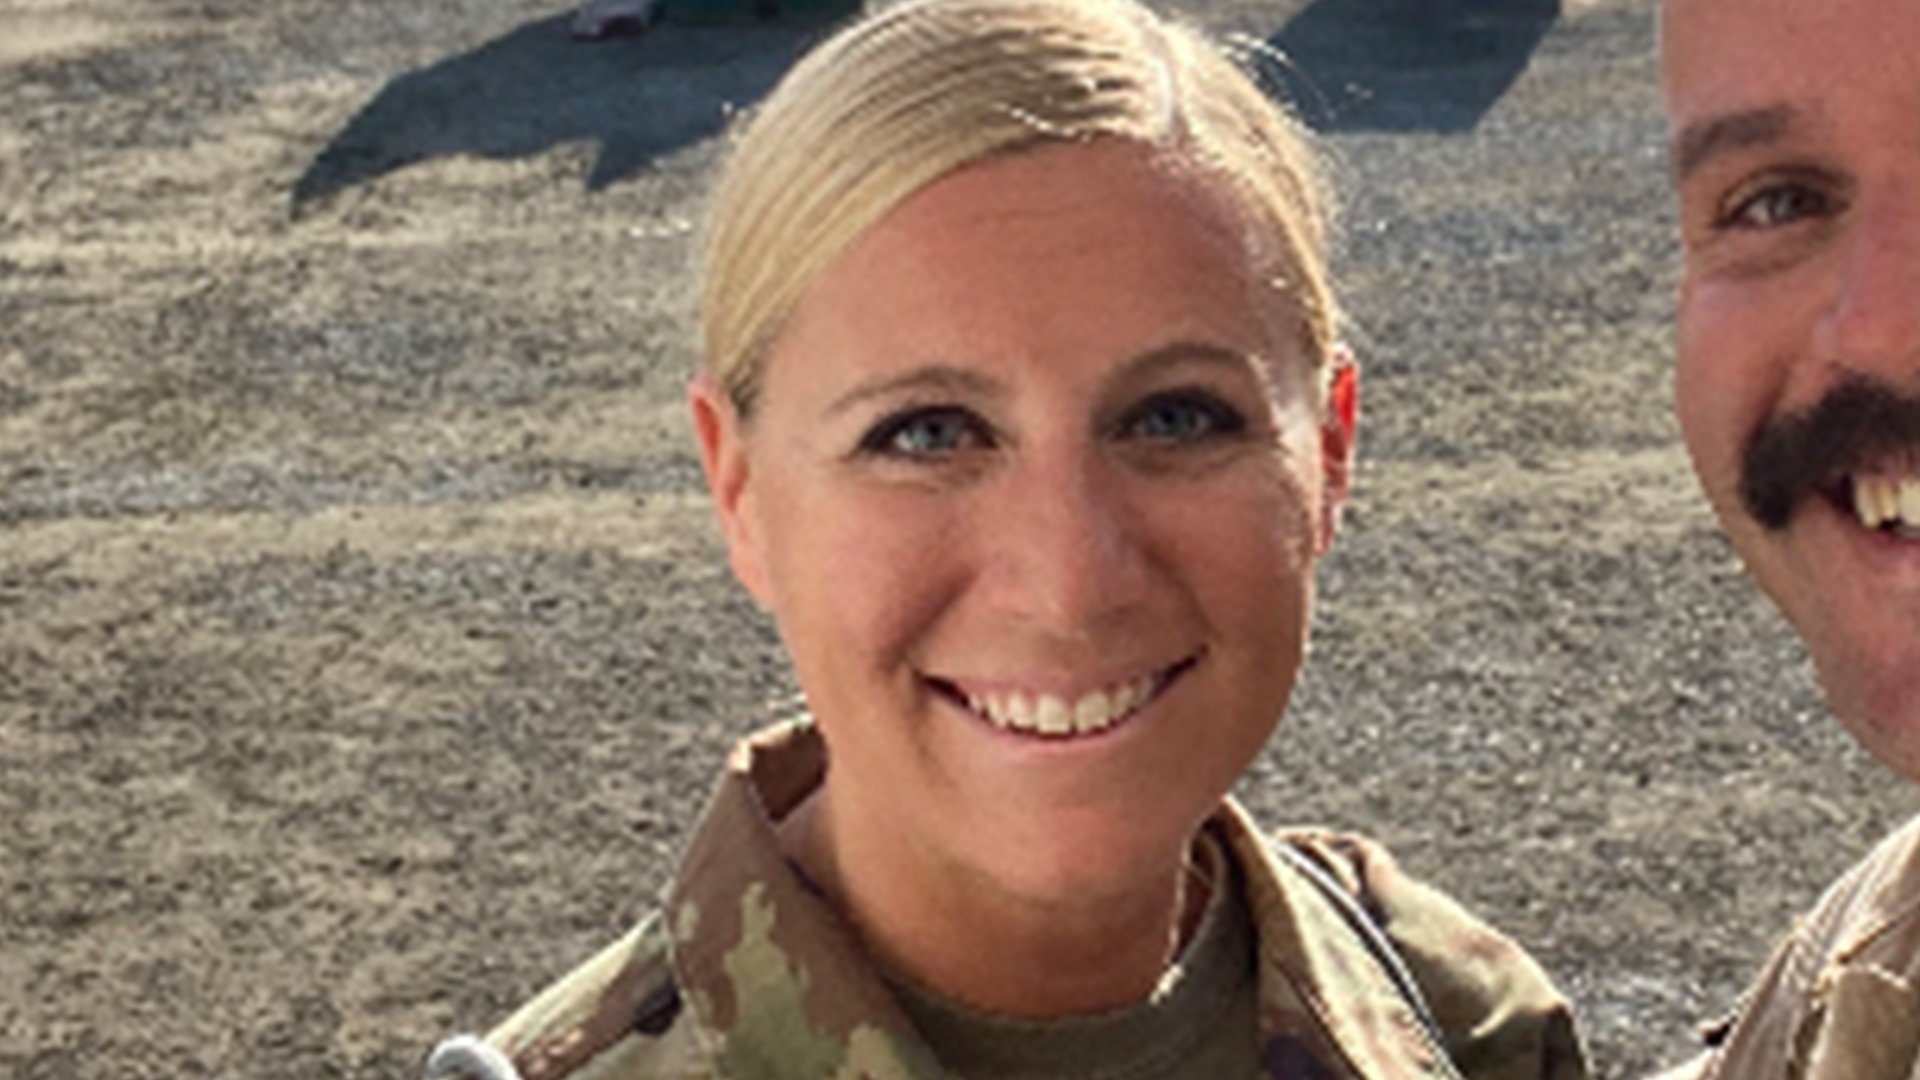 Capt. Kelliann Leli, an Air Force doctor, pictured with her husband, was struck and killed by a forklift on Nov. 27, 2020, on Al Dhafra Air Base in the United Arab Emirates. A Roxboro, North Carolina, man pleaded guilty to manslaughter charges on Nov. 8 in her death. US Air Force photo.